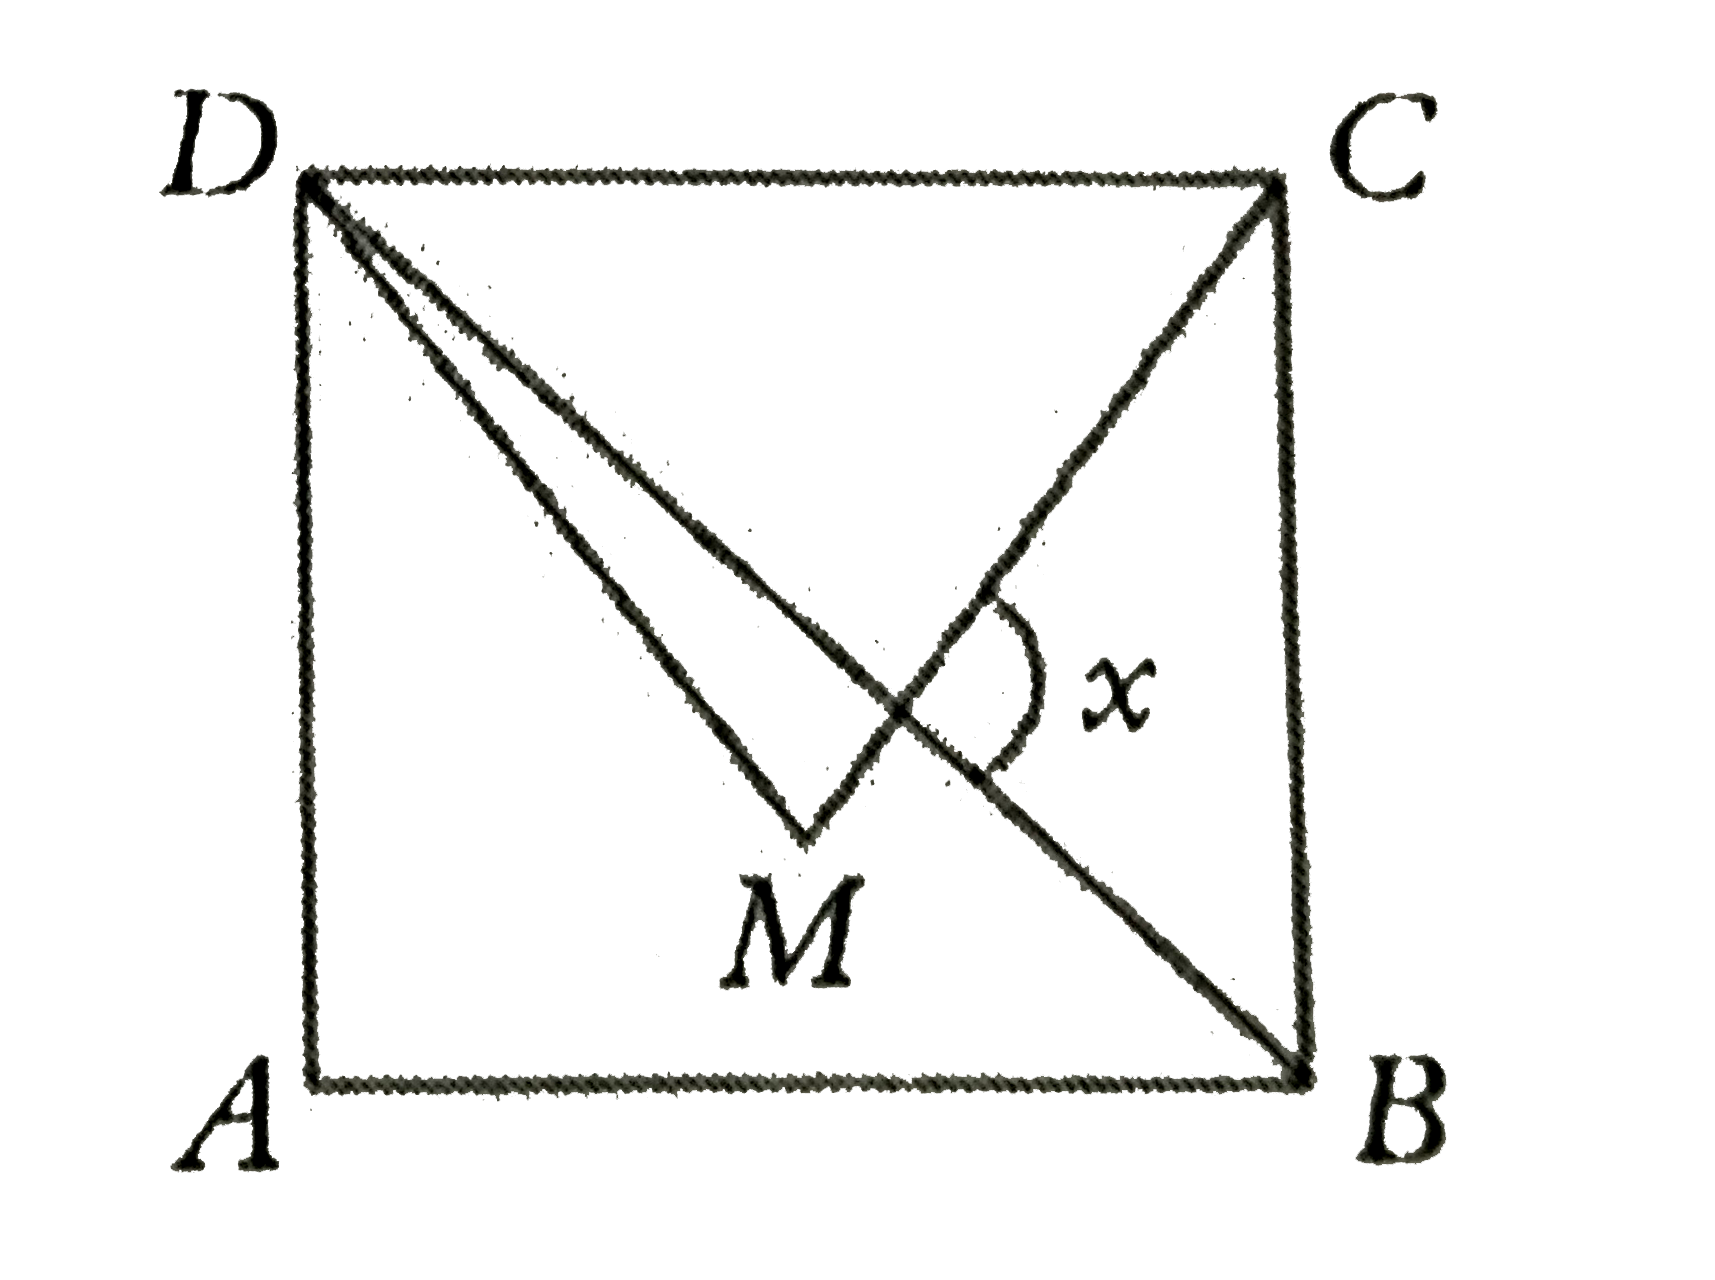 In the figure below, ABCD is a square , MDC is an equilateral triangle. Find the value of x.